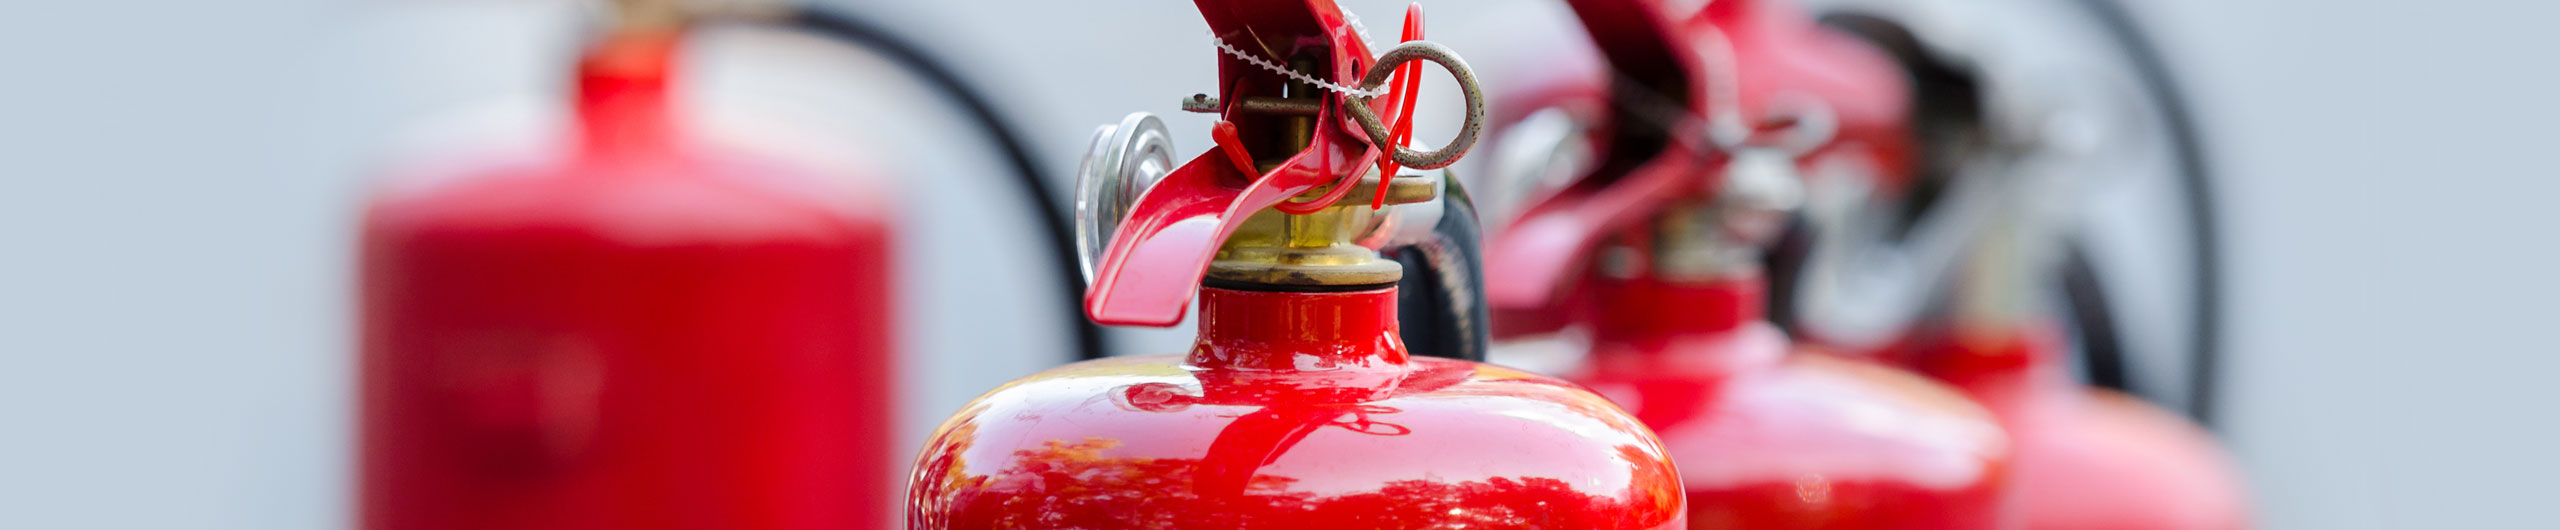 Fire extinguisher service and repair